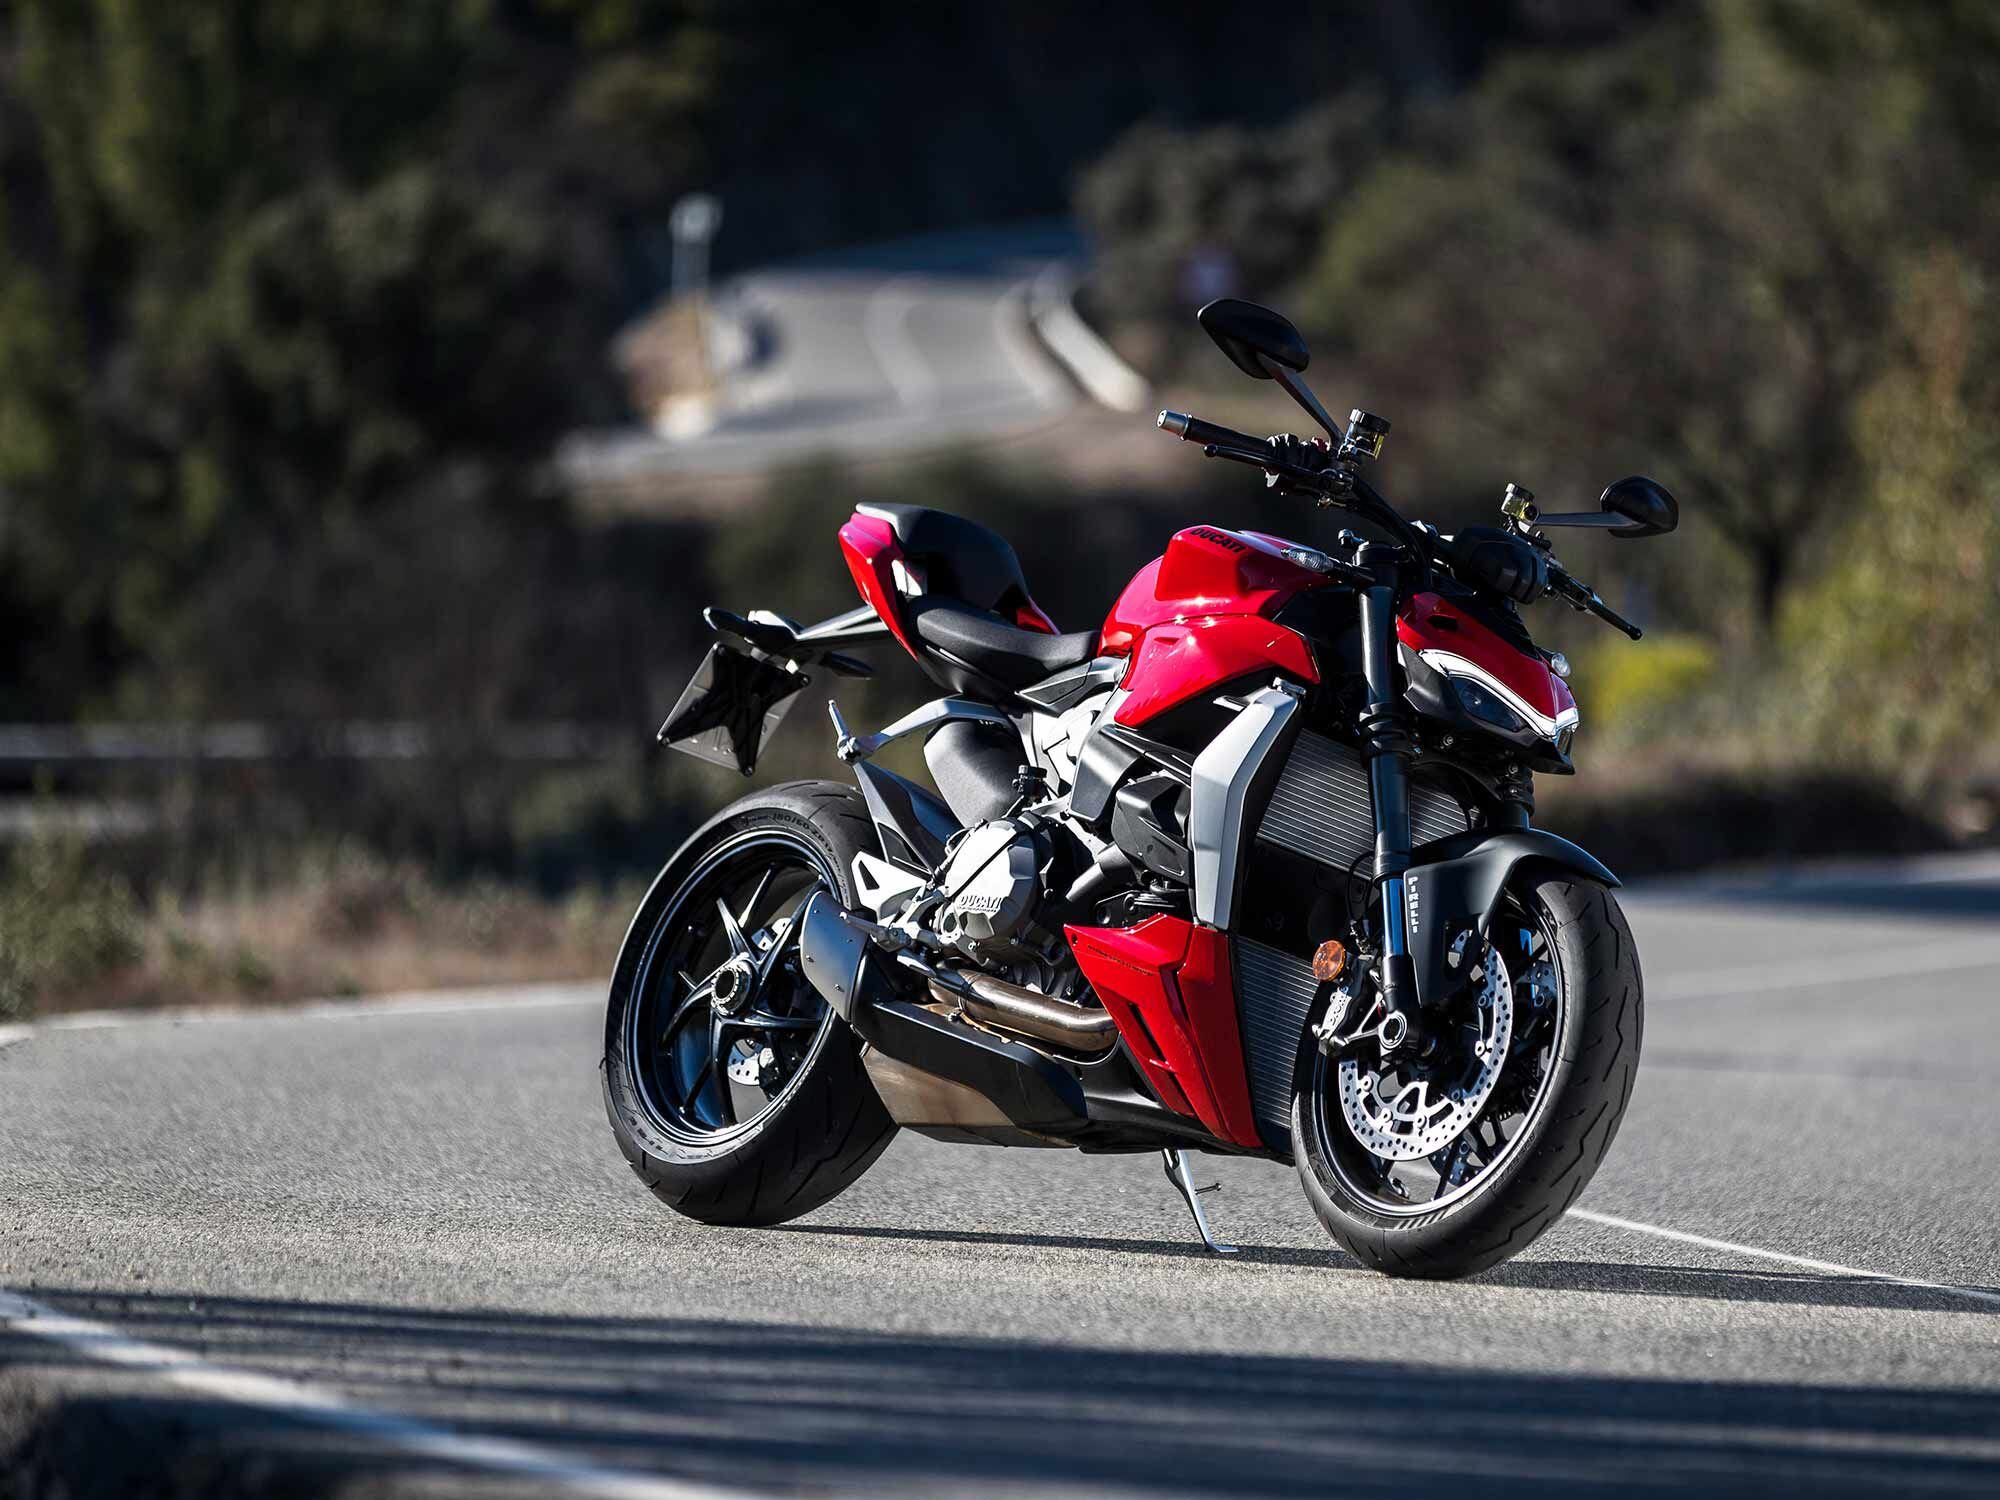 The Ducati Streetfighter V2 is essentially a stripped-down, bare-skinned version of the Panigale V2 sportbike and aimed at being a more practical option to its Streetfighter lineup.